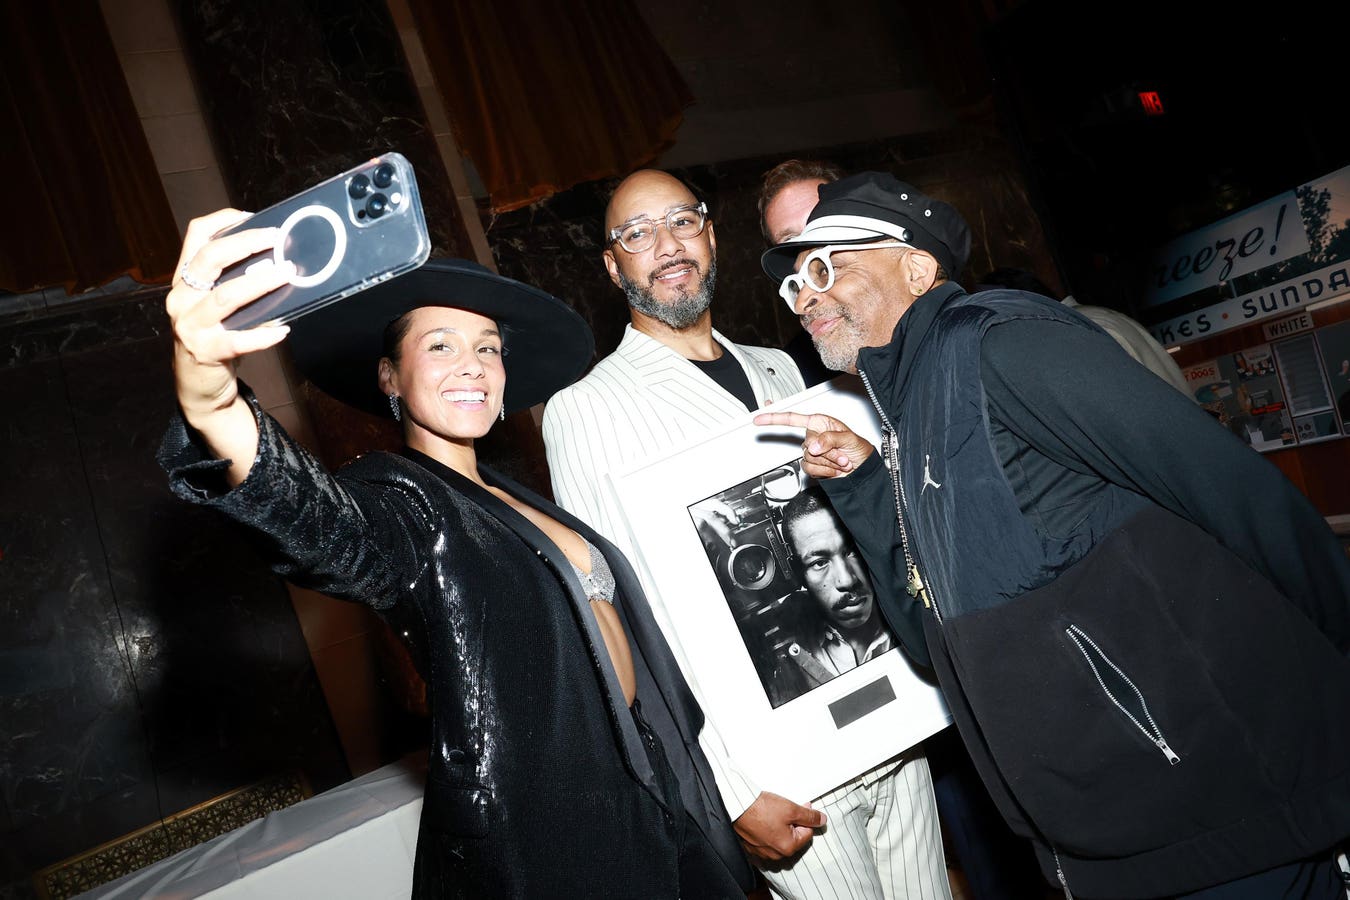 The Gordon Parks Foundation Annual Gala Celebrates The Arts & Activism With Alicia Keys, Colin Kaepernick, Spike Lee, Patti Smith, And More